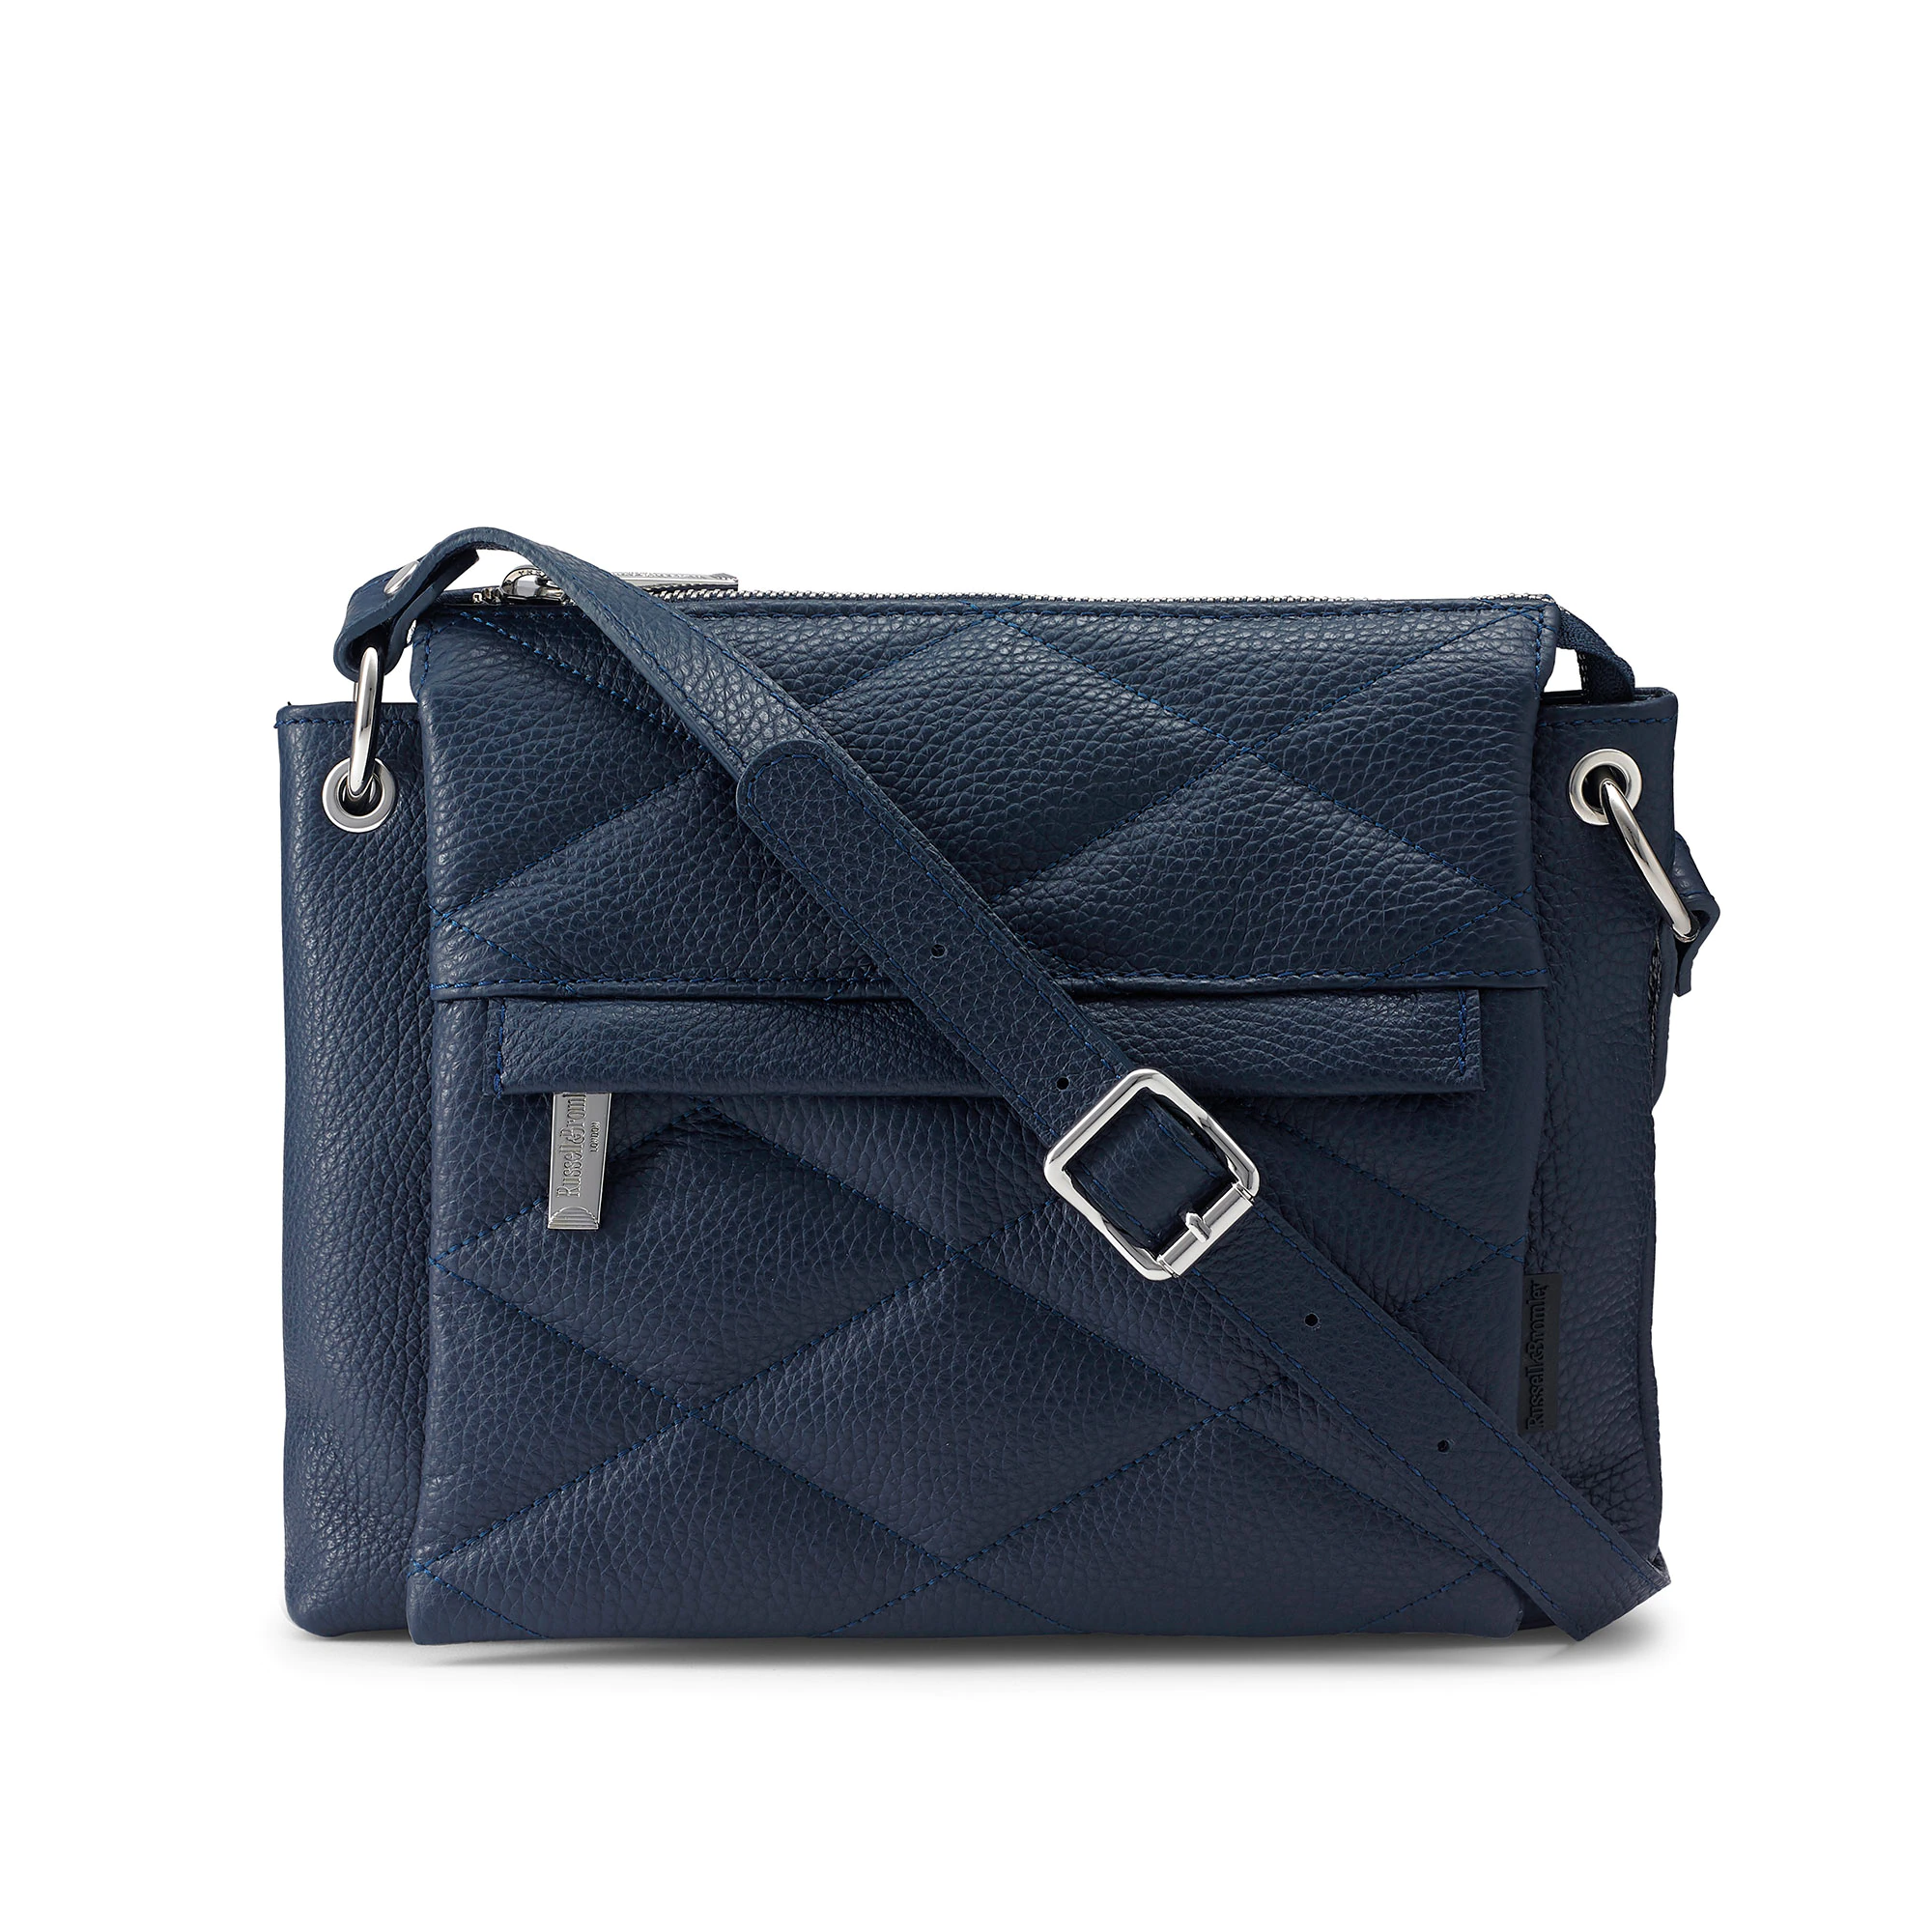 Russell And Bromley TROOPER Multi Pocket Crossbody Navy 240520